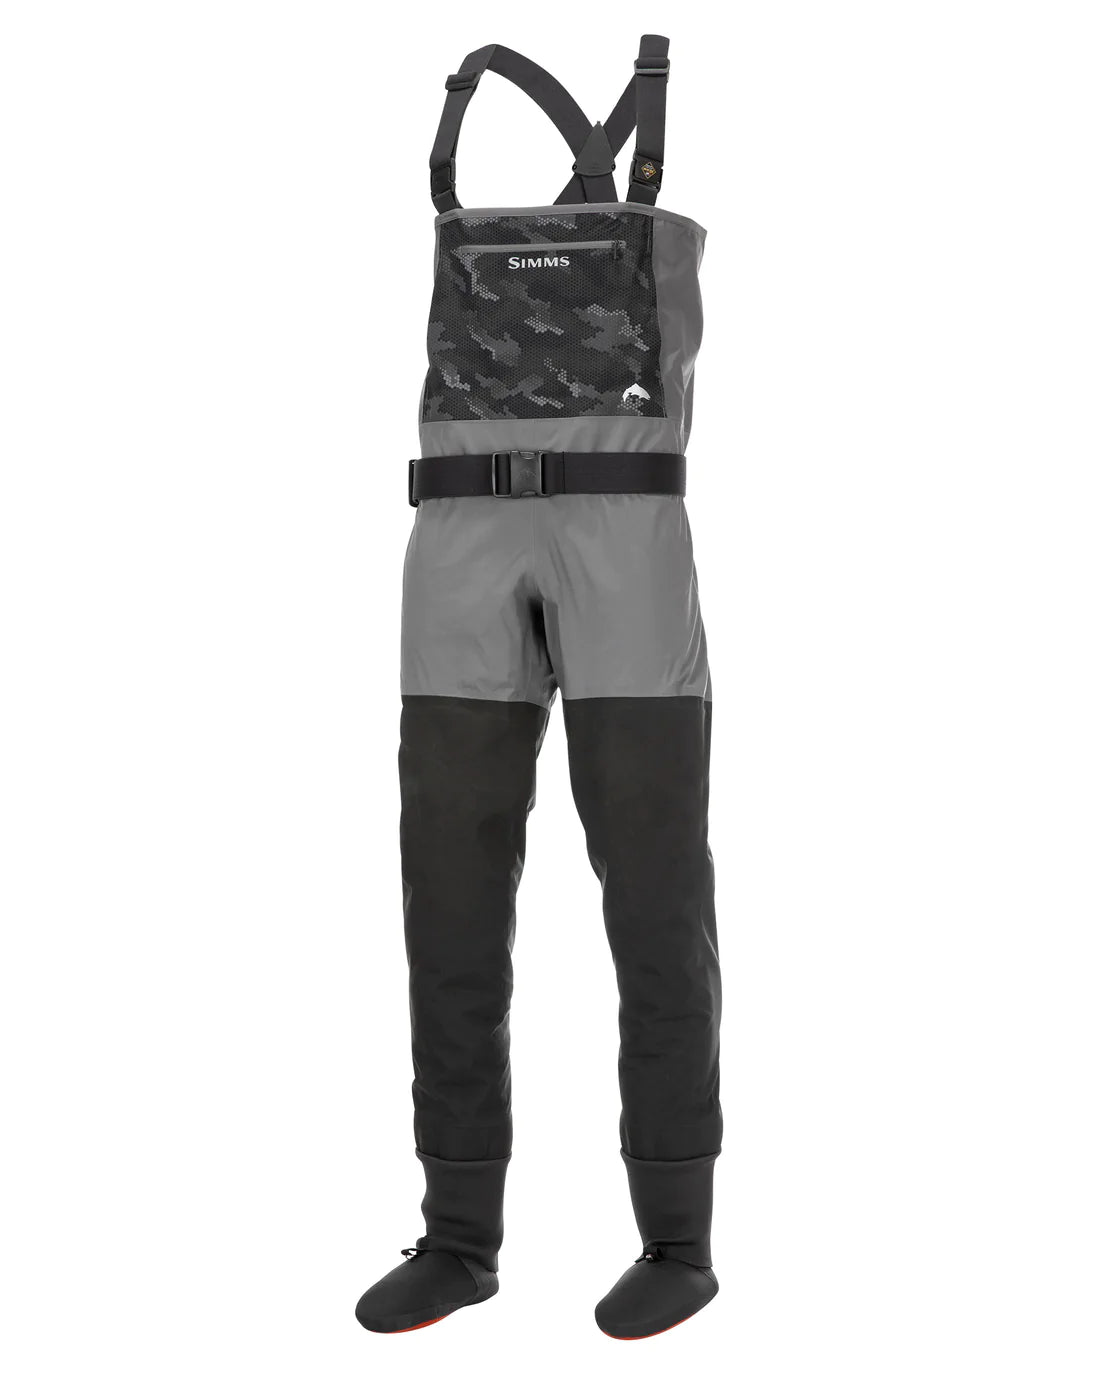 Simms Guide SF Classic Wader